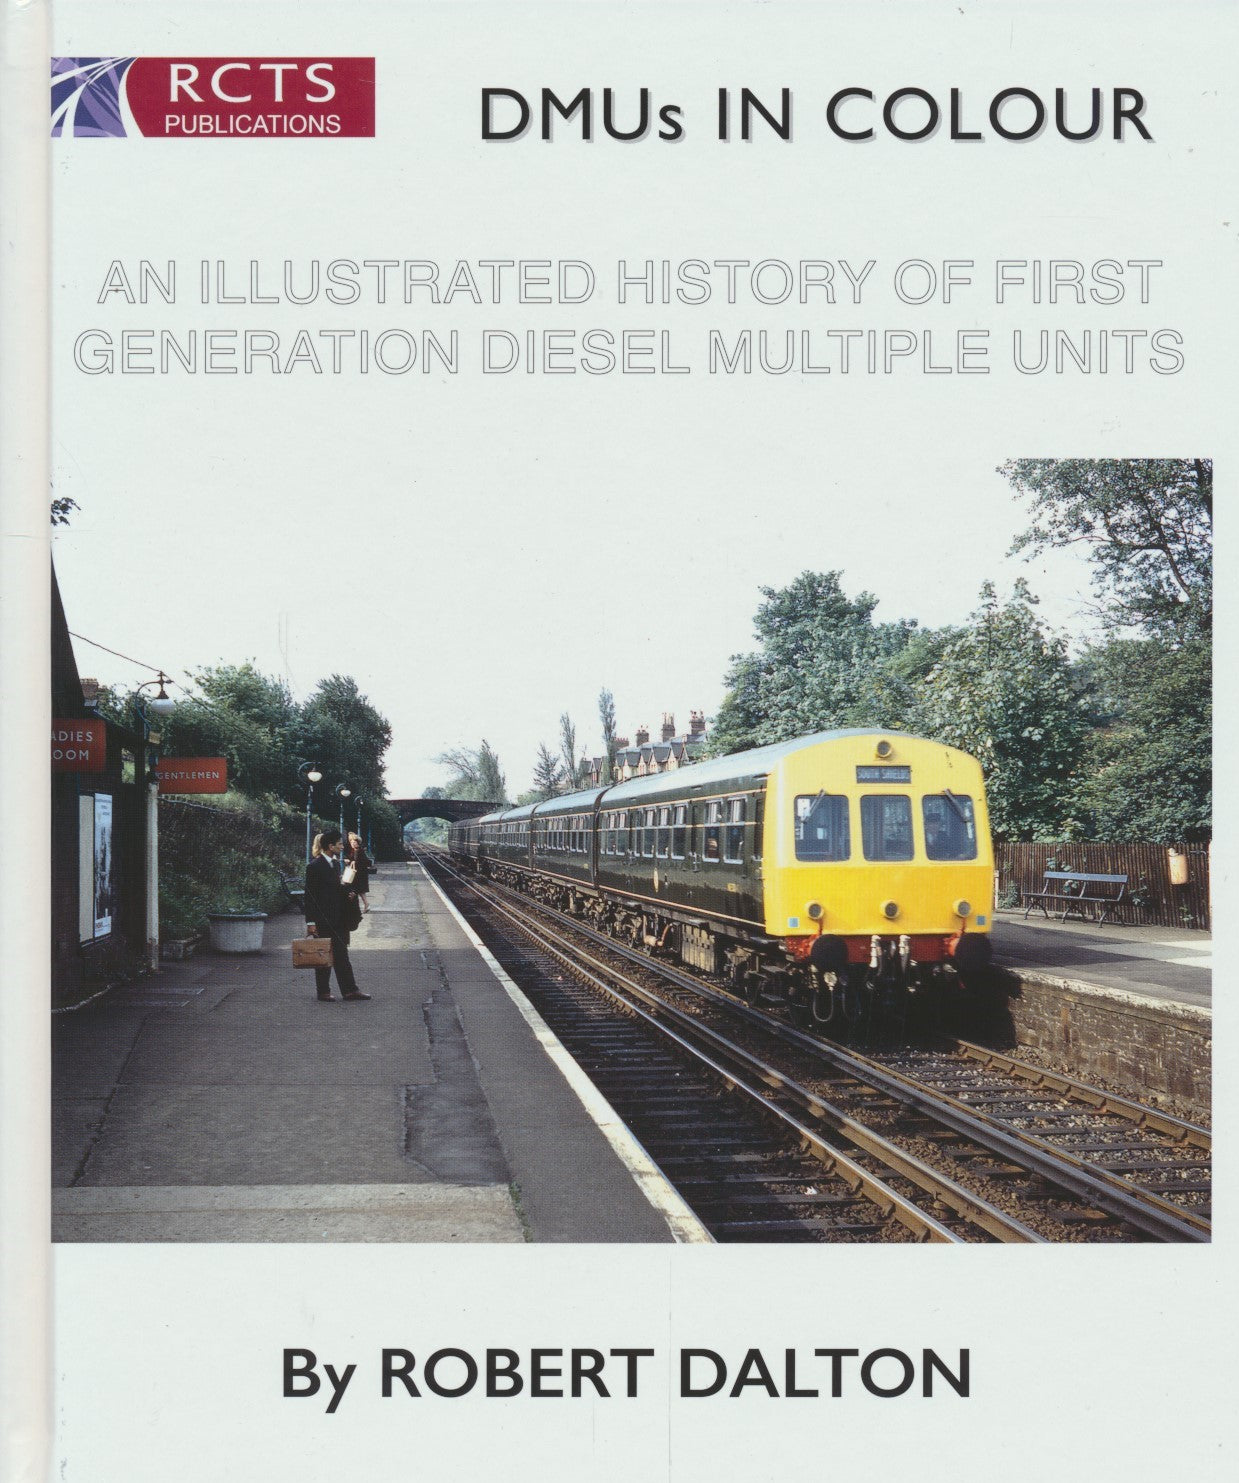 DMUs in Colour: An Illustrated History of First Generation Diesel Multiple Units